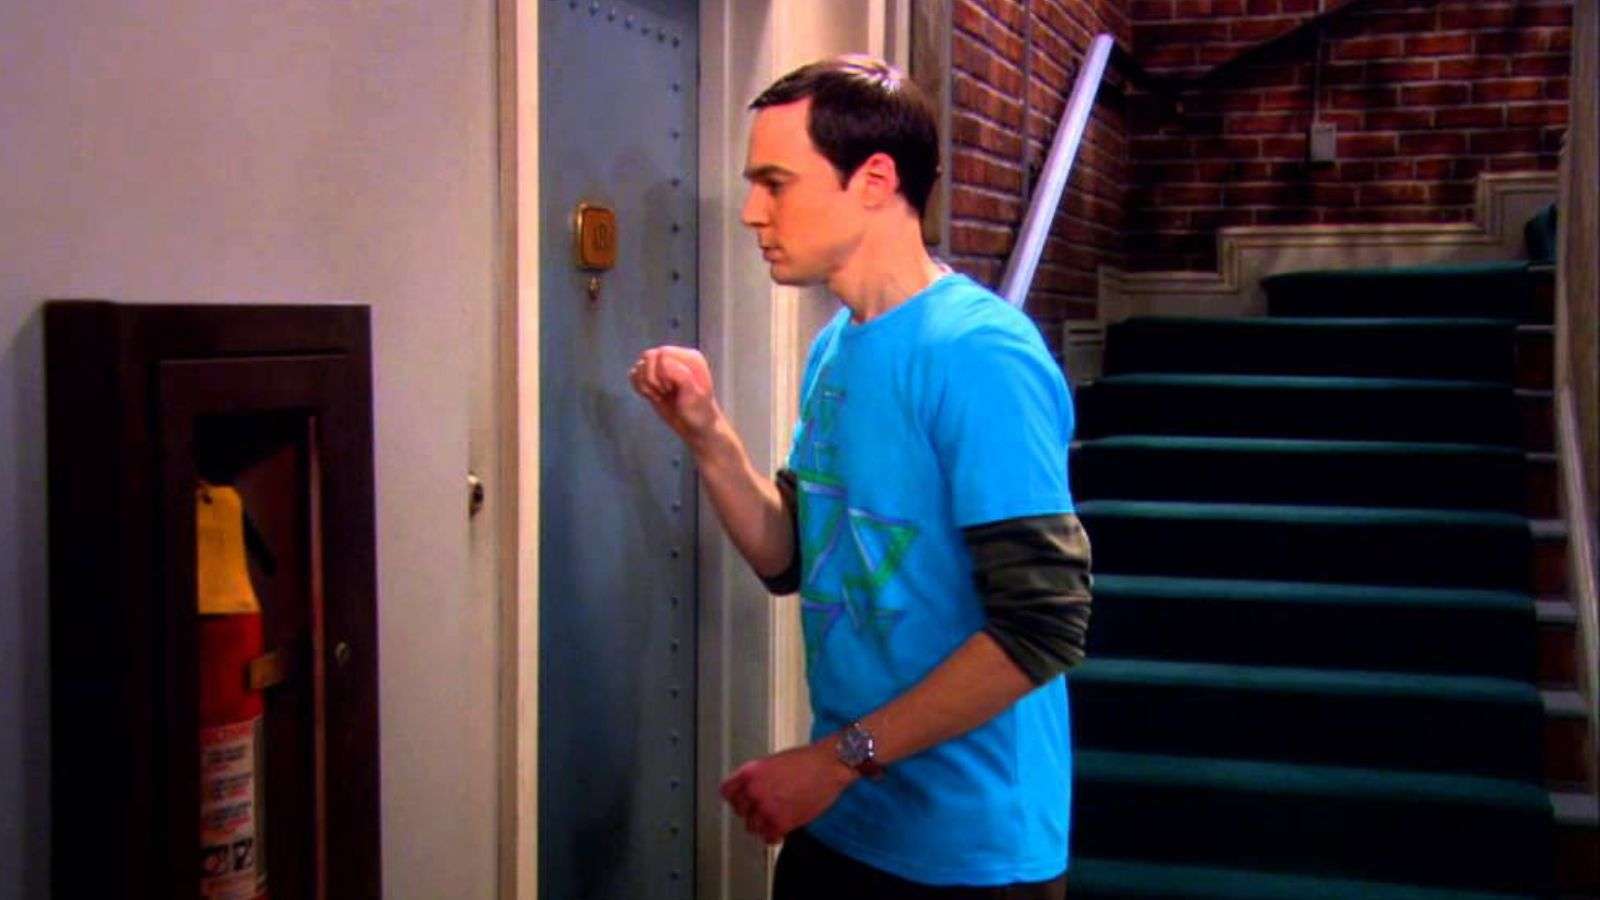 Sheldon Cooper knocking on an apartment door in The Big Bang Theory